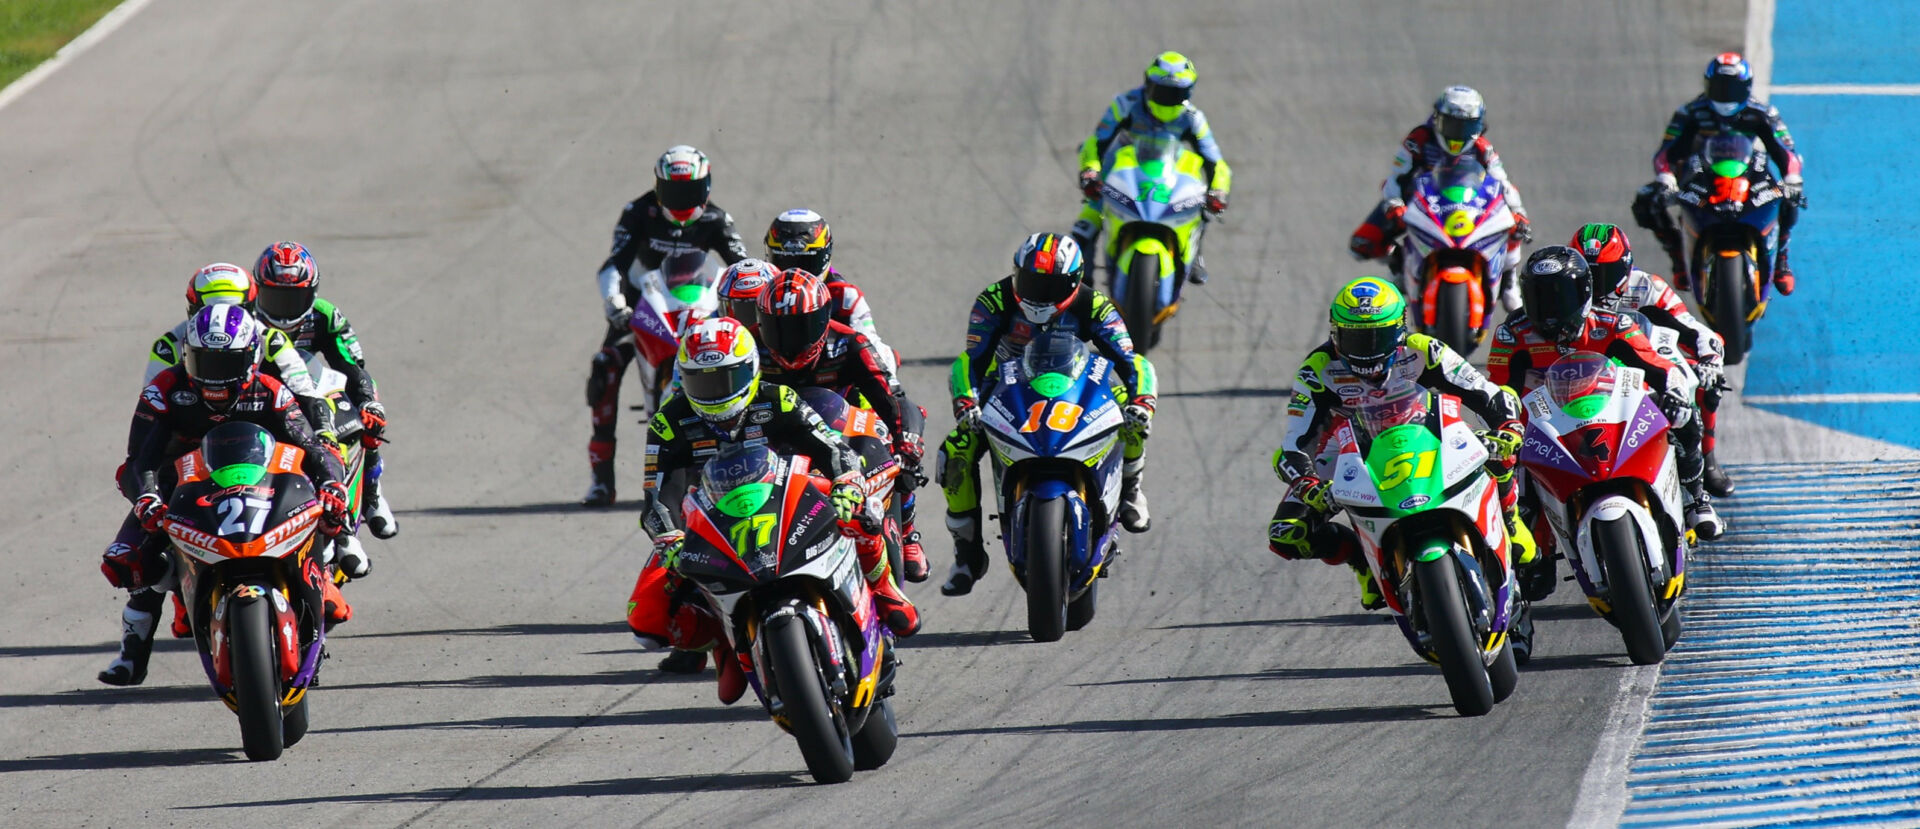 The start of a MotoE race in 2022 with eventual Champion Dominique Aegerter (77) leading on his Energica Ego Corsa electric racebike. Photo courtesy Dorna.